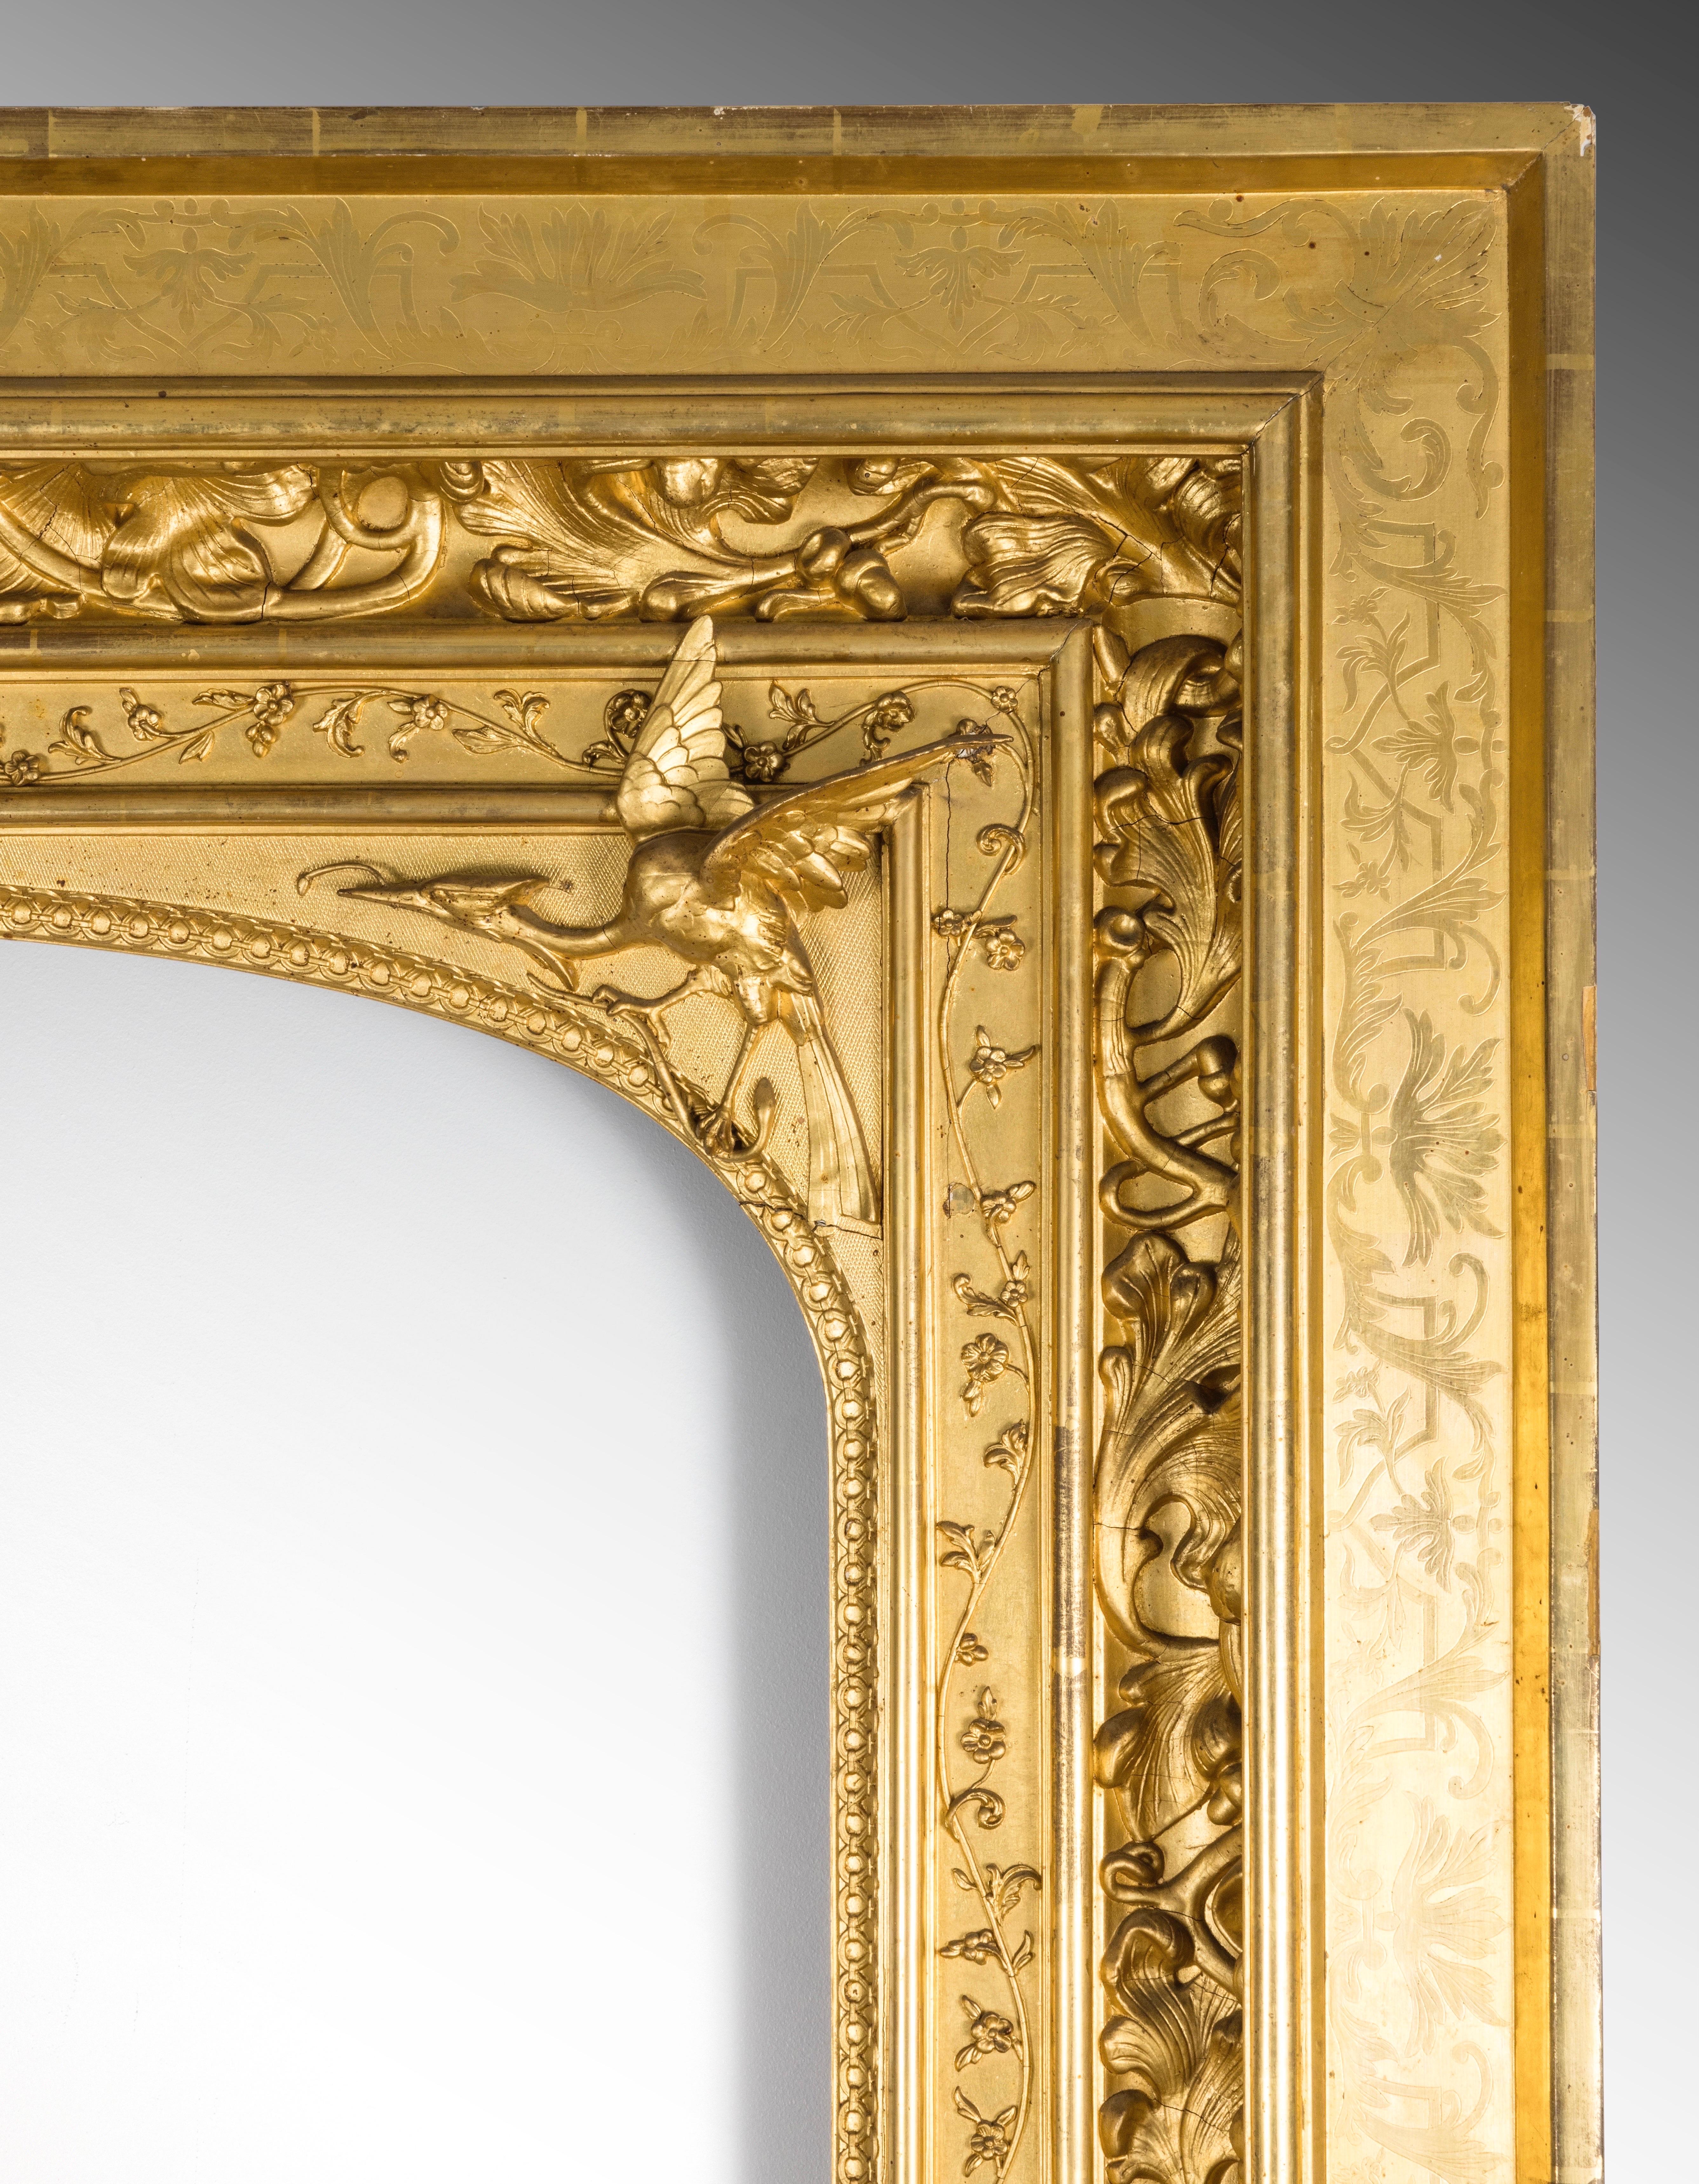 Gilt Very Large Renaissance Revival Gilded French Frame 19th Century, Circa 1835 For Sale